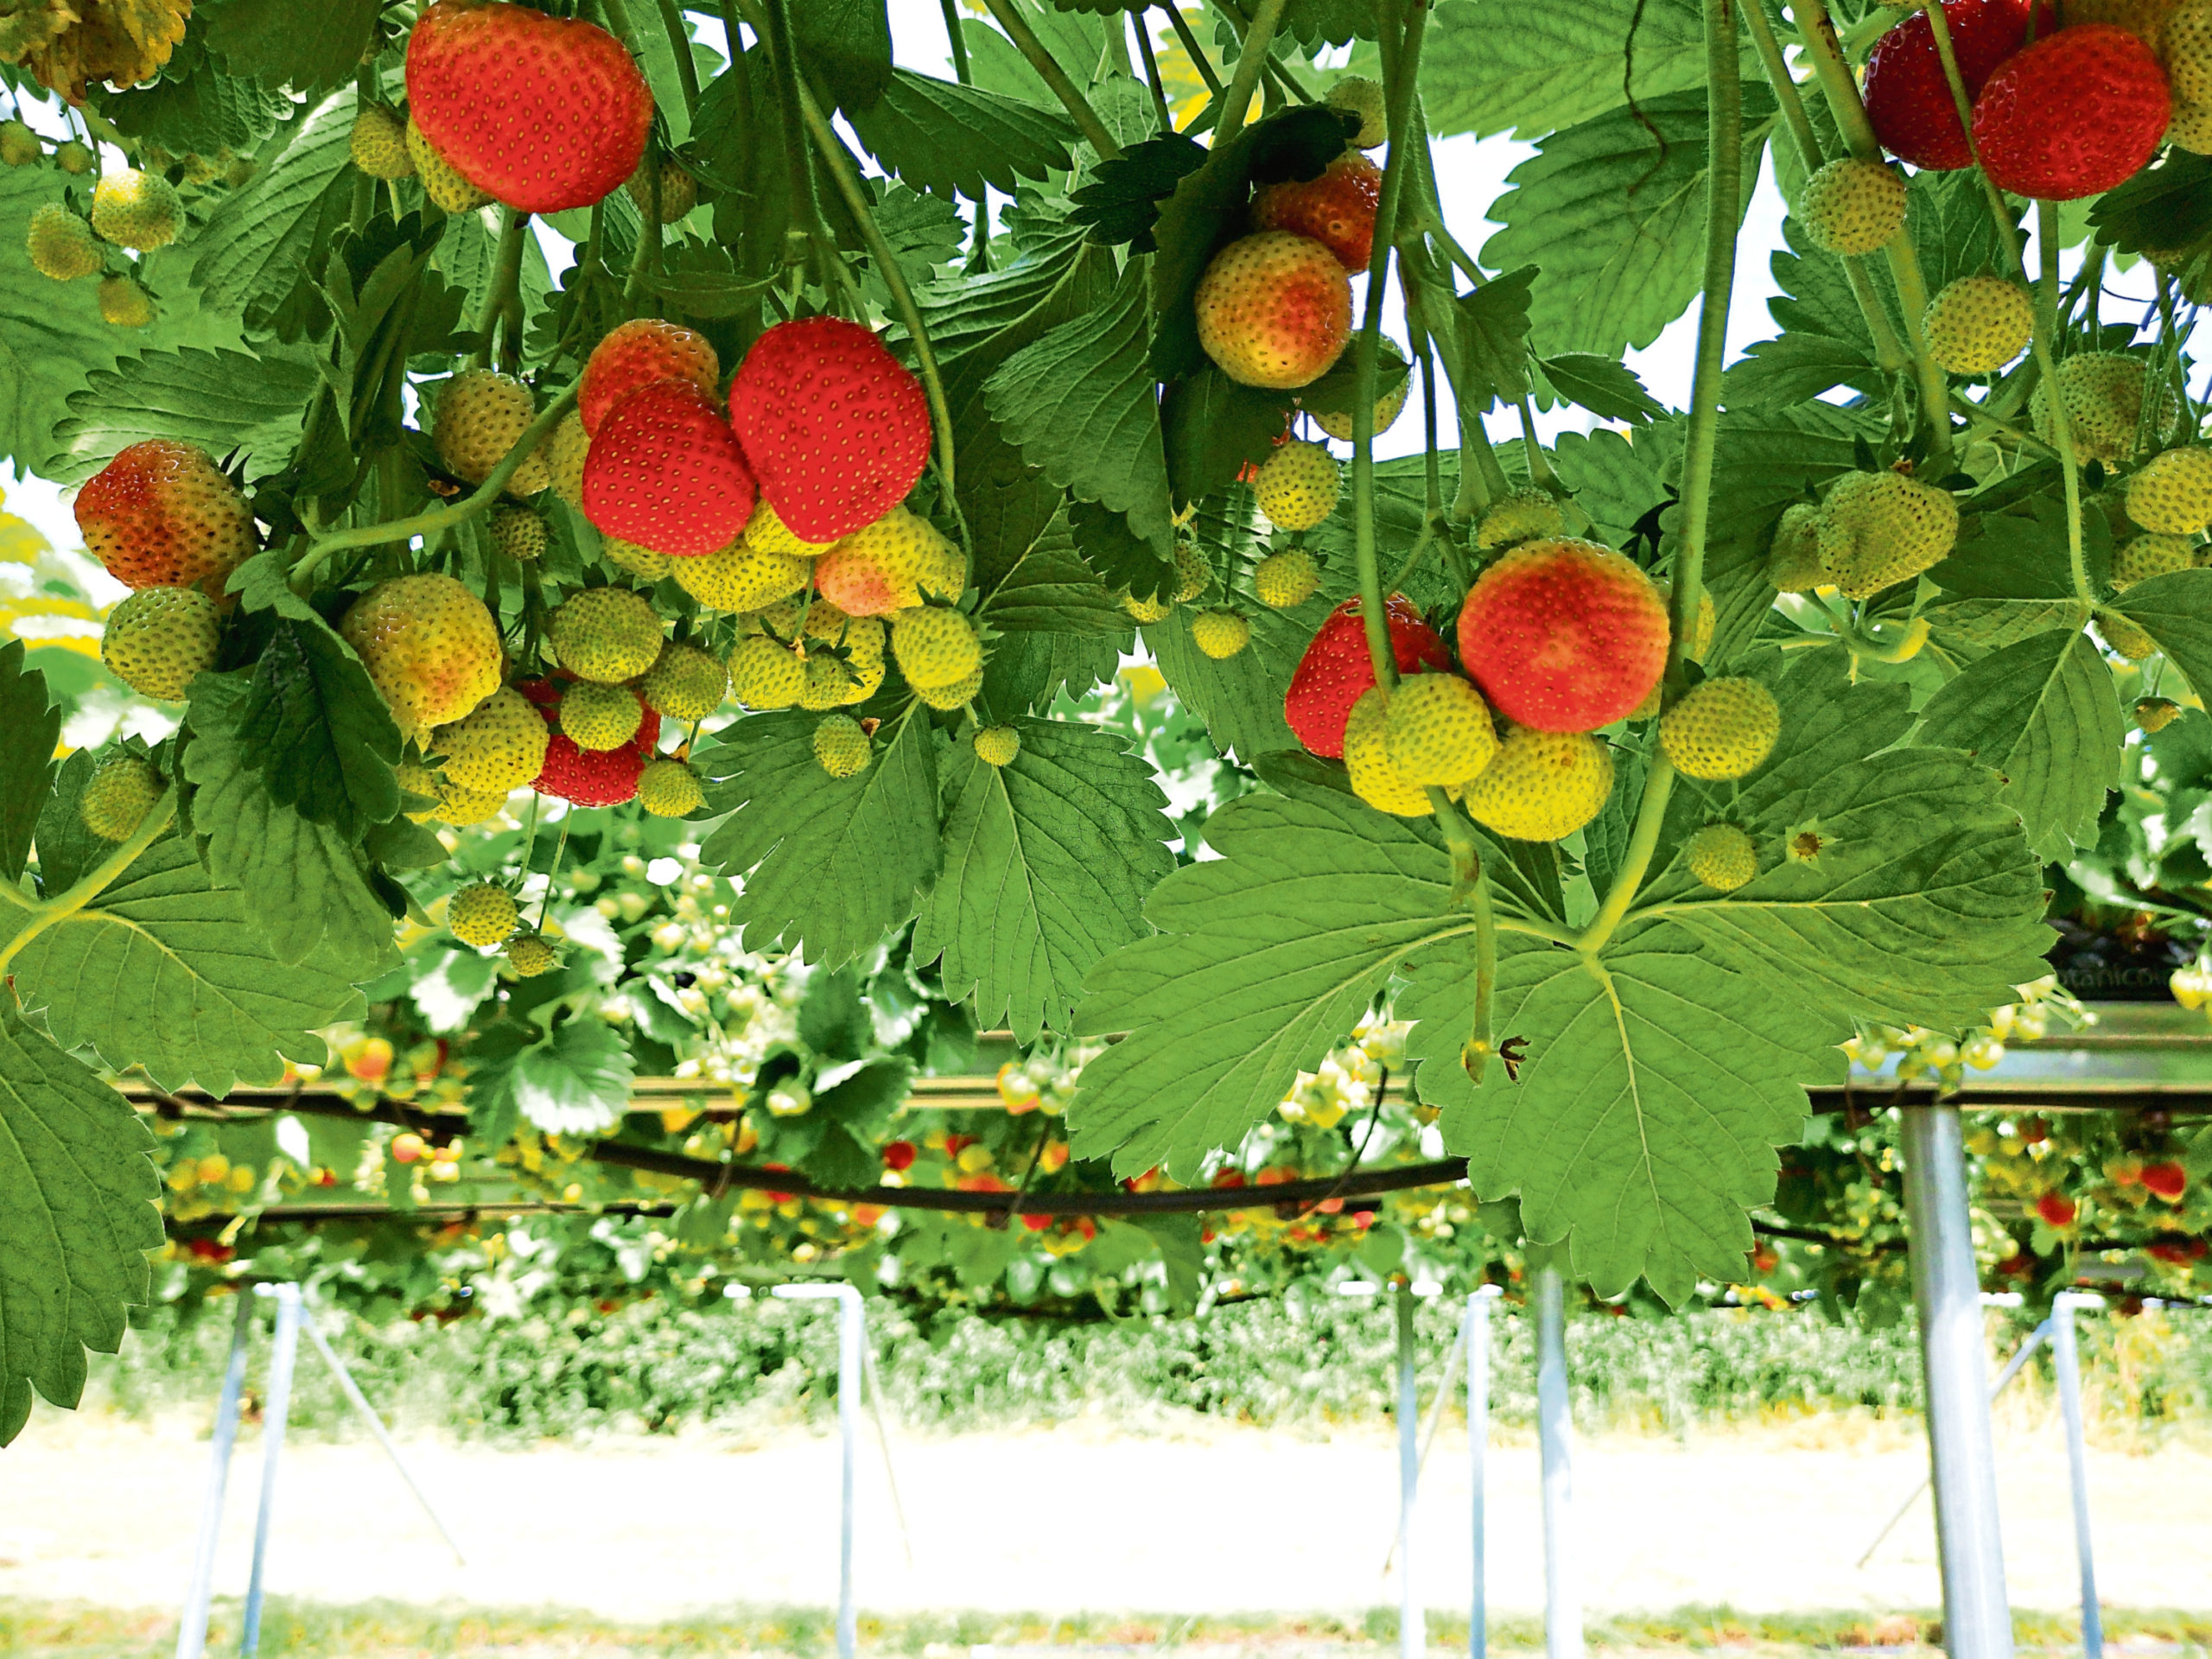 Soft fruit growers are busy recruiting workers, but have also warned that recruitment will not provide the answer to all of their labour problems.